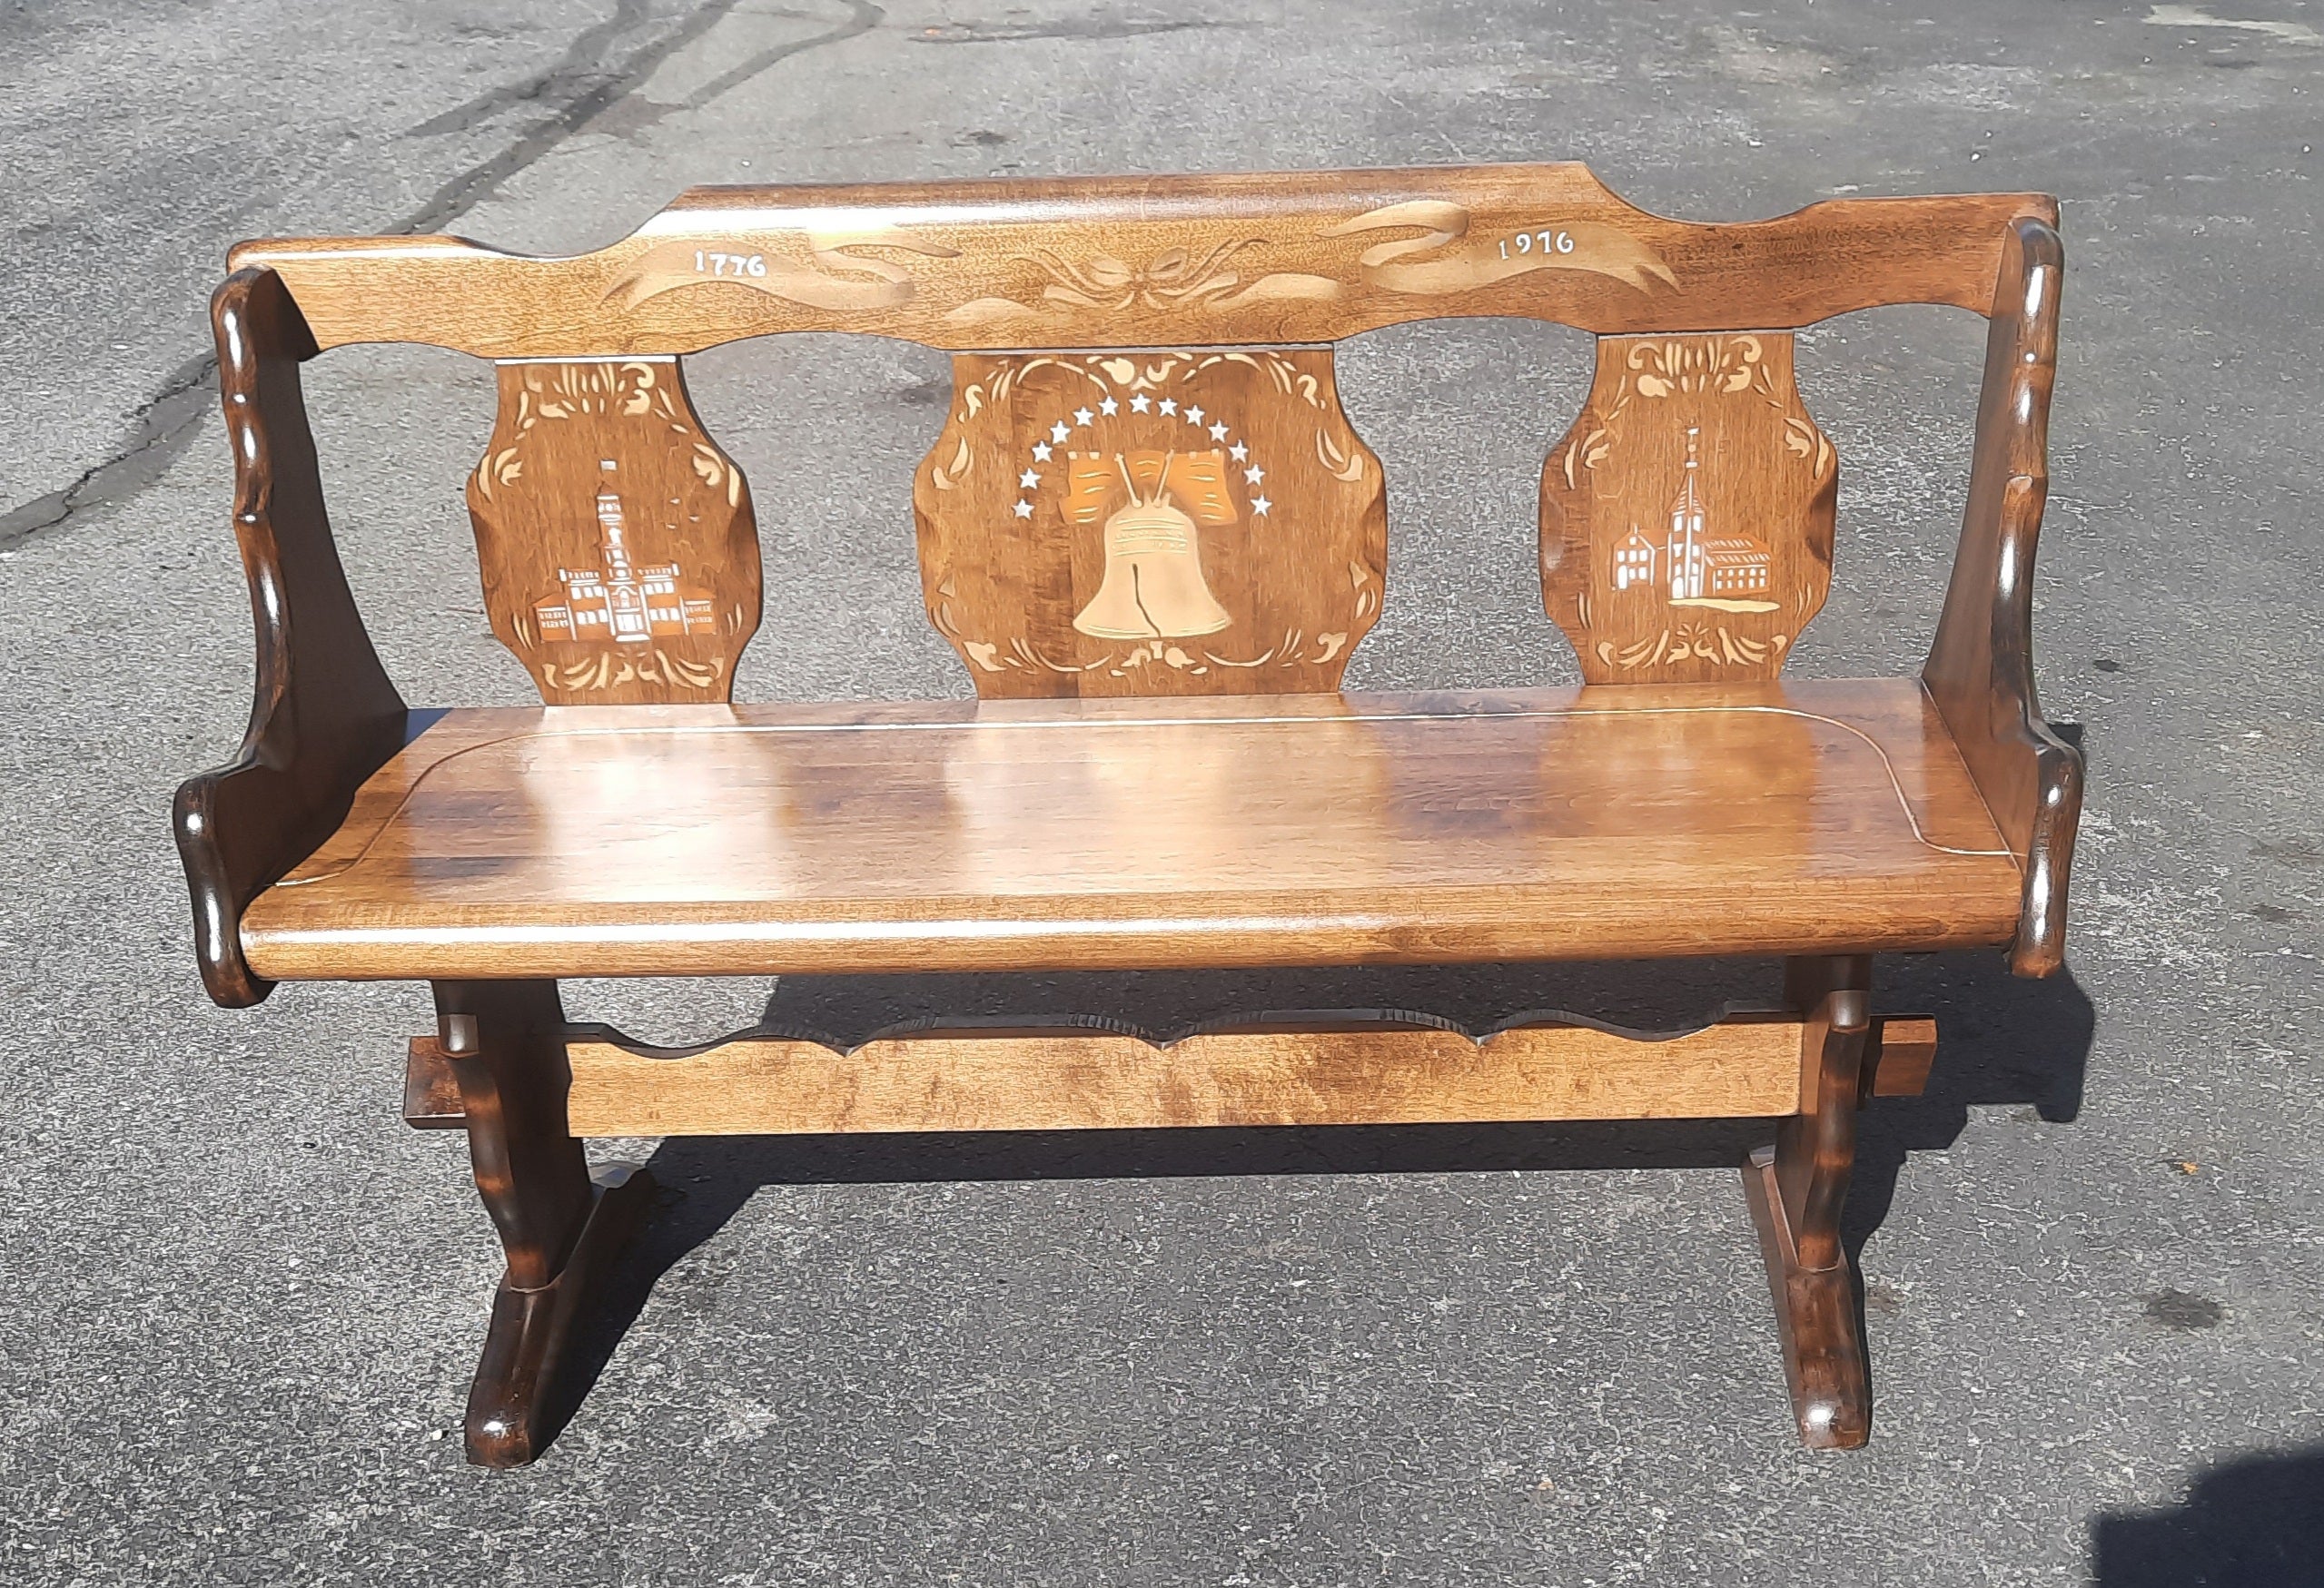 This rock solid bench is made by Standard Chair of Gardner Inc. in Massachusetts. What we have found out is a limited edition chair only made in 1976 for the 200 year anniversary of this country. They only made 5000 of these bench which is all